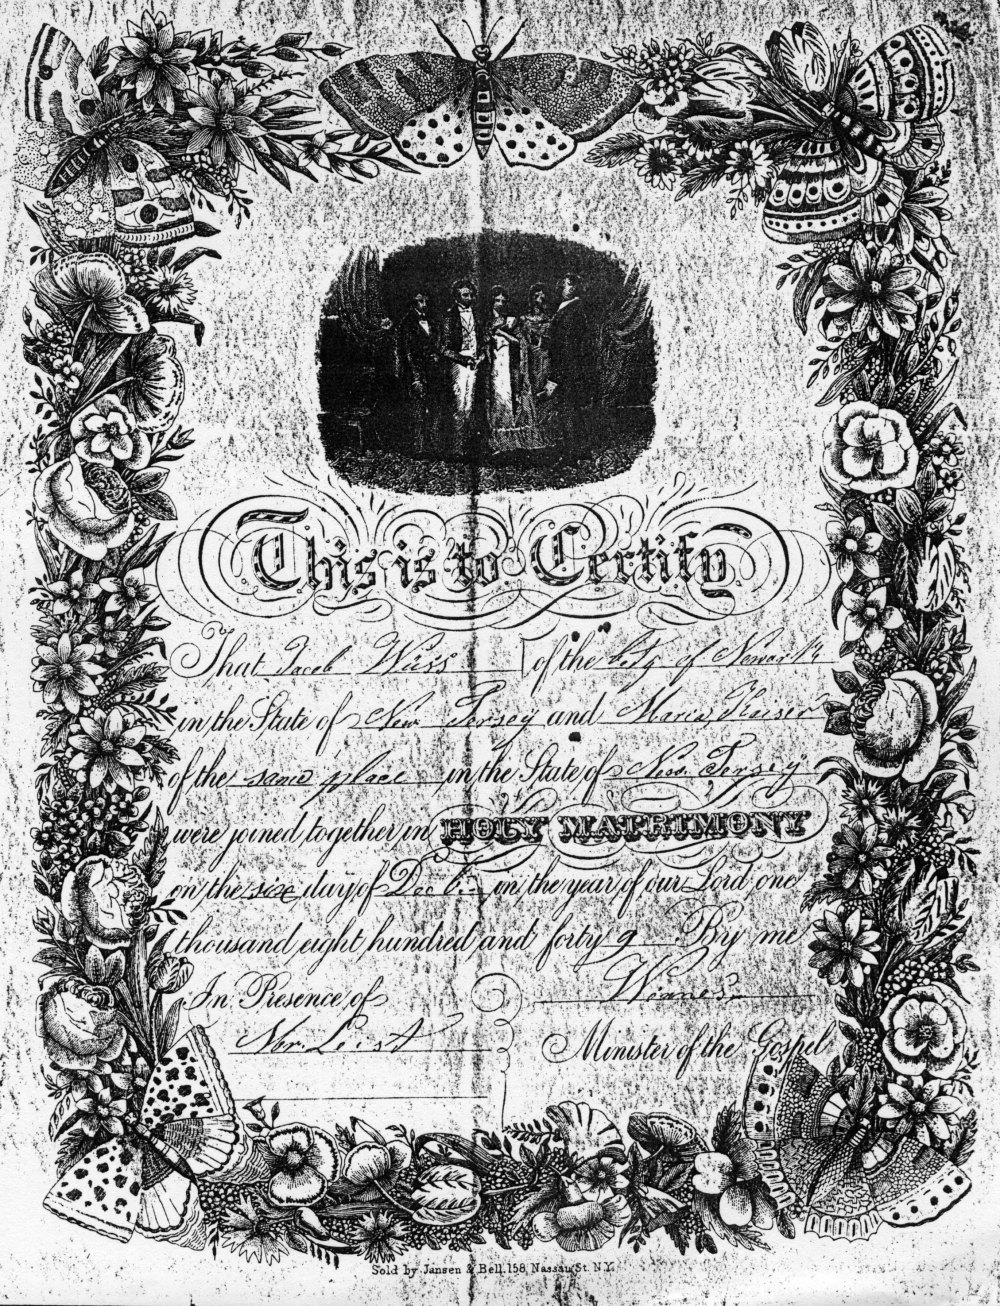 Jacob-Wiss-marriage-certificate